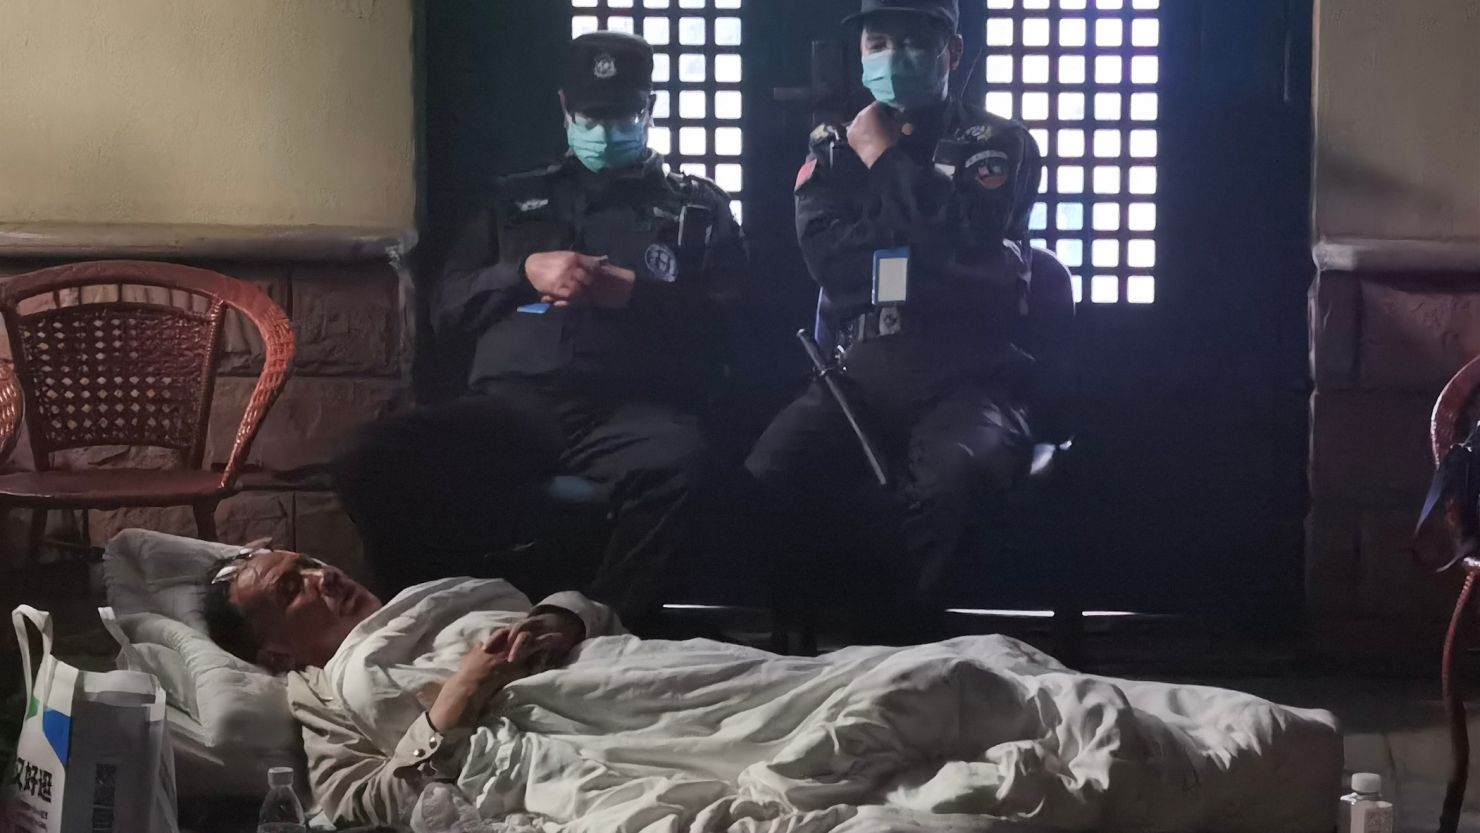 Chinese virologist Zhang Yongzhen sleeps outside his lab at the Shanghai Public Health Clinical Center in this image shared on social media.